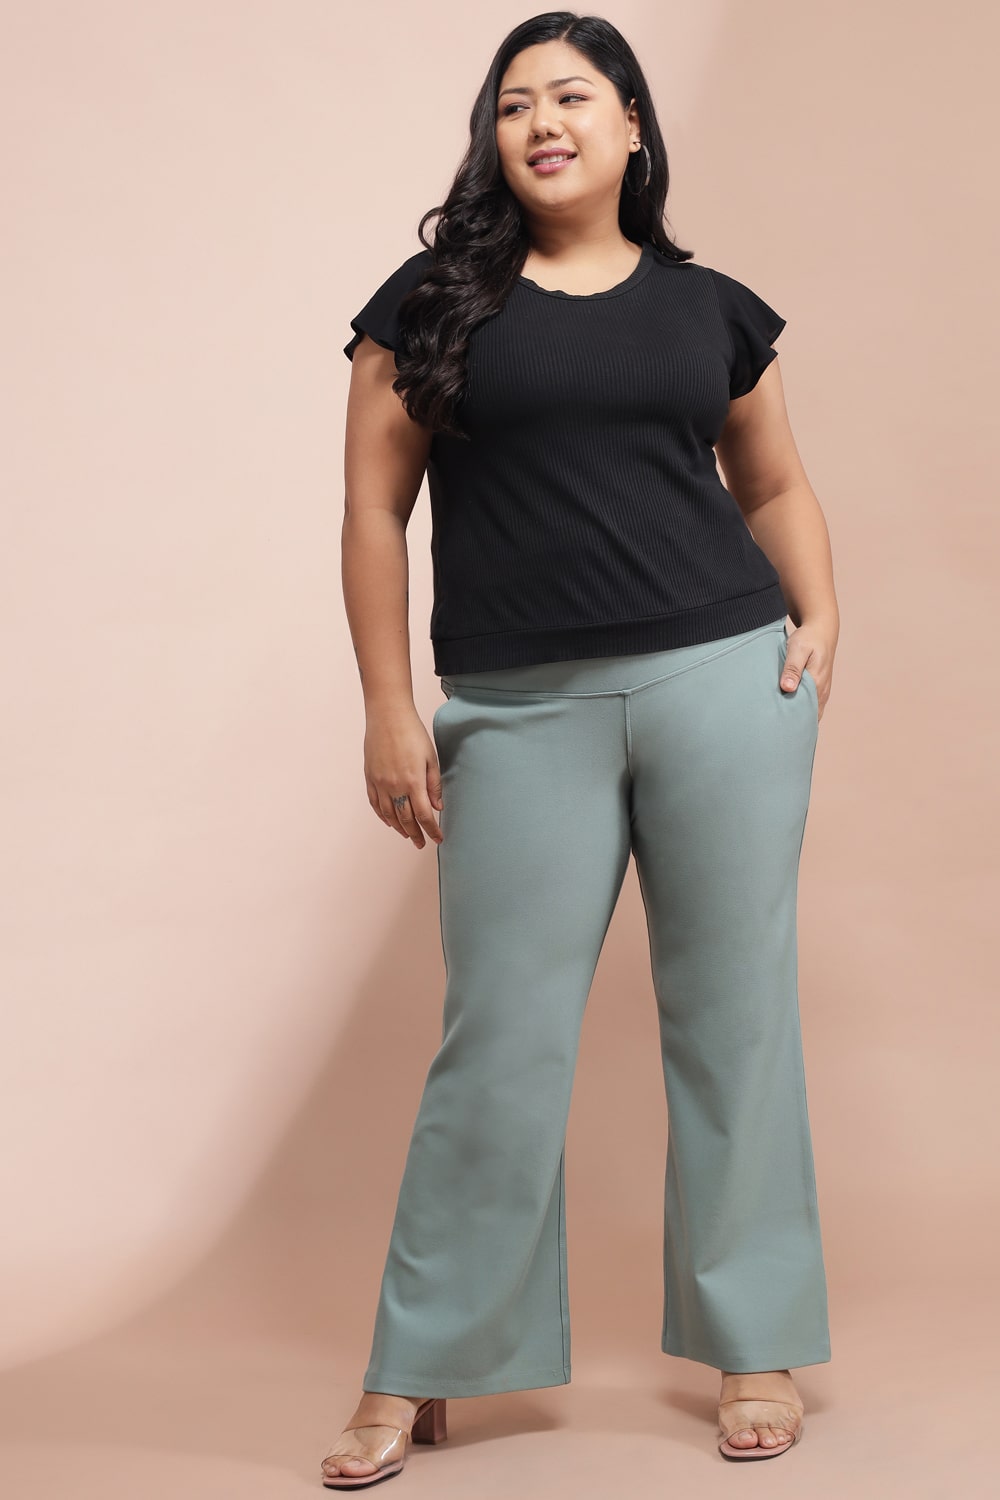 Bell Bottom Pants For Women - Plus Size Flare Jeans